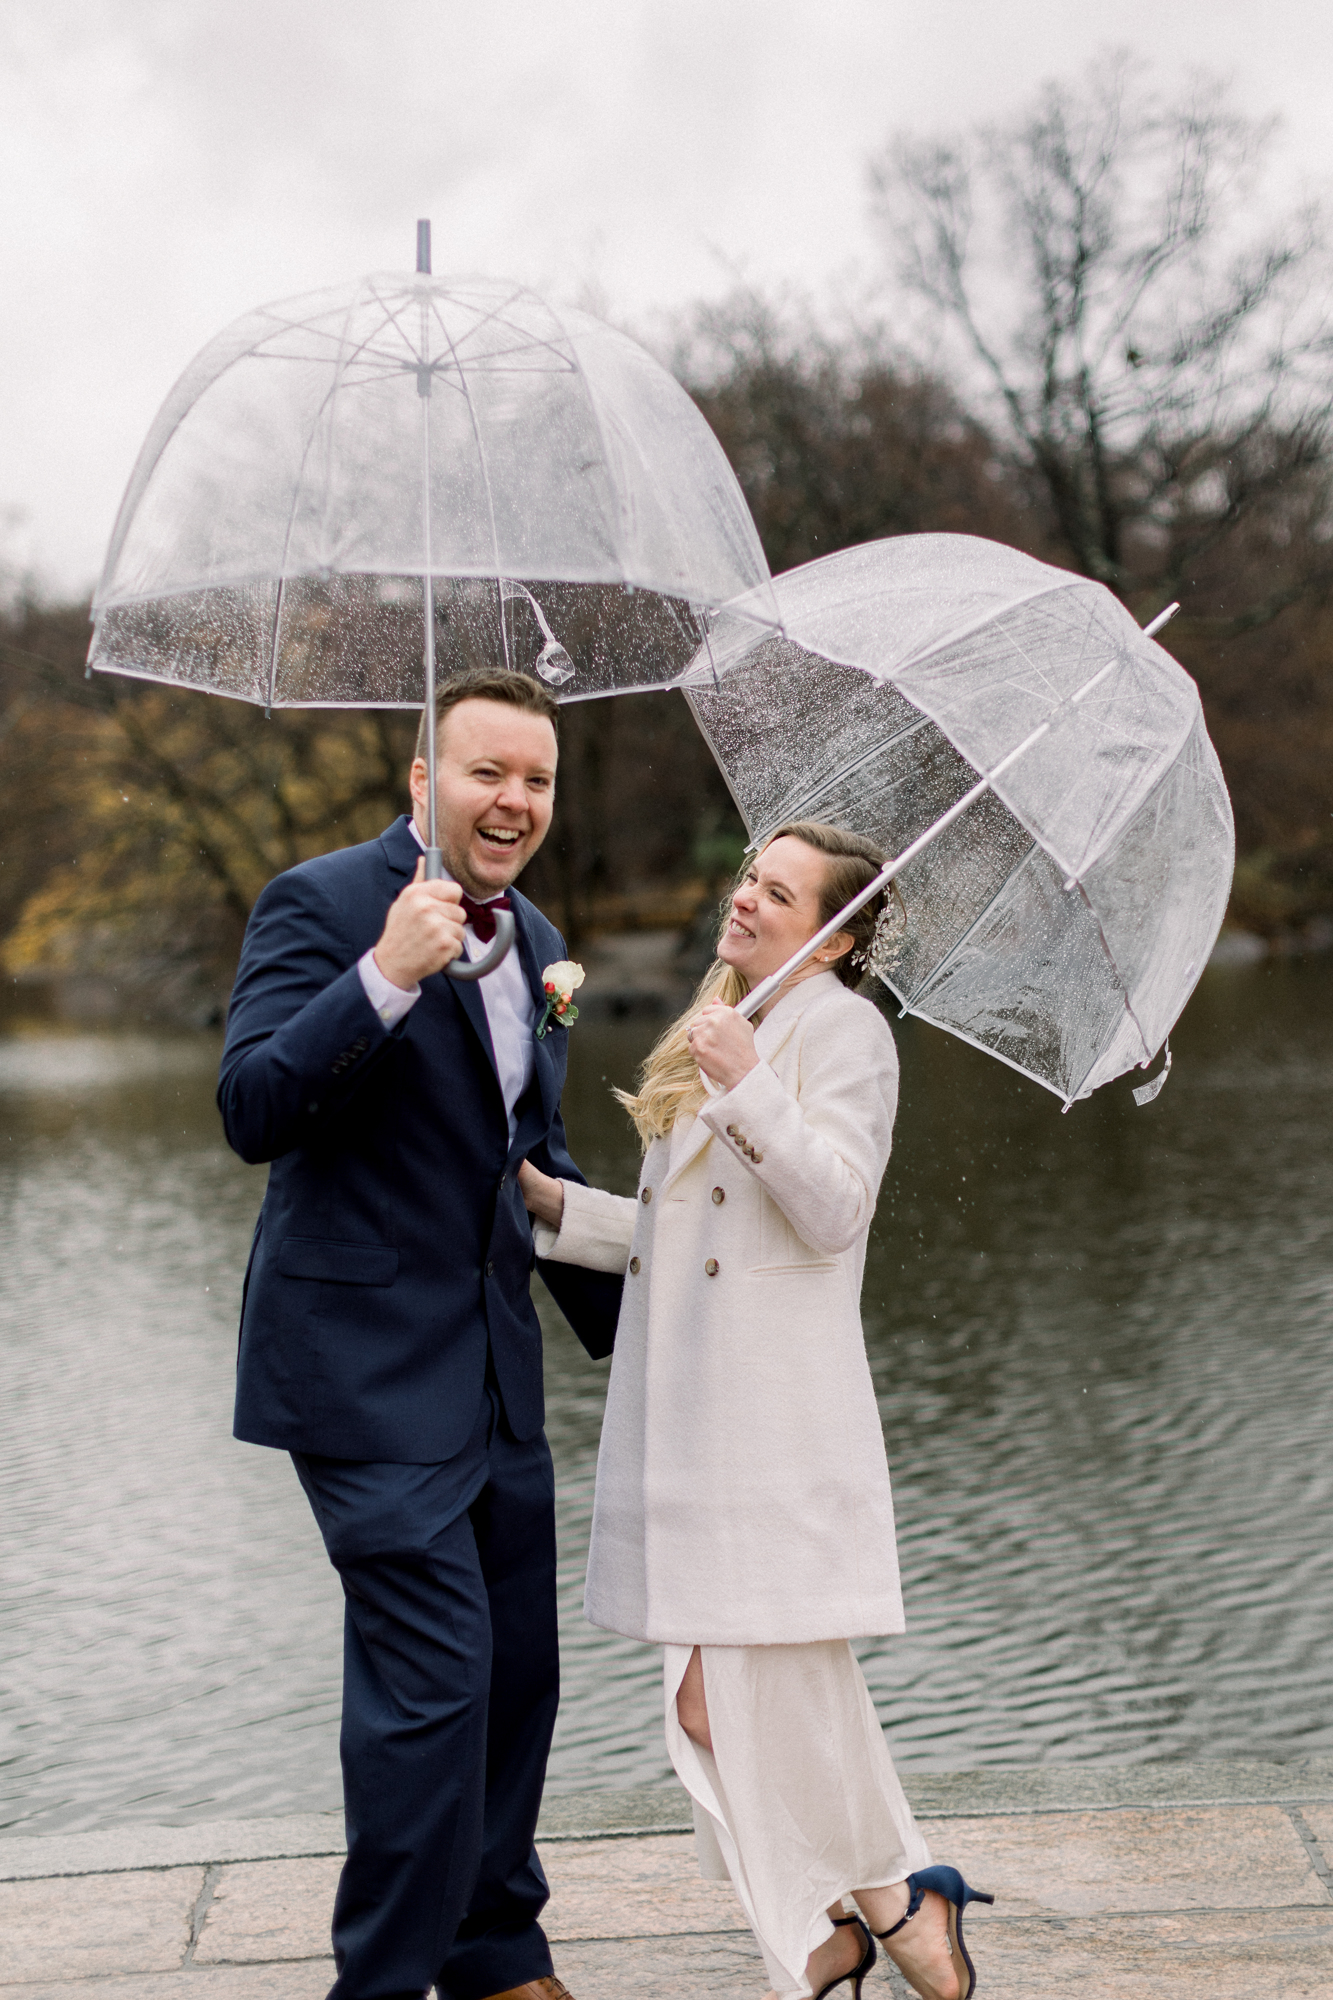 Awesome Central Park elopement locations